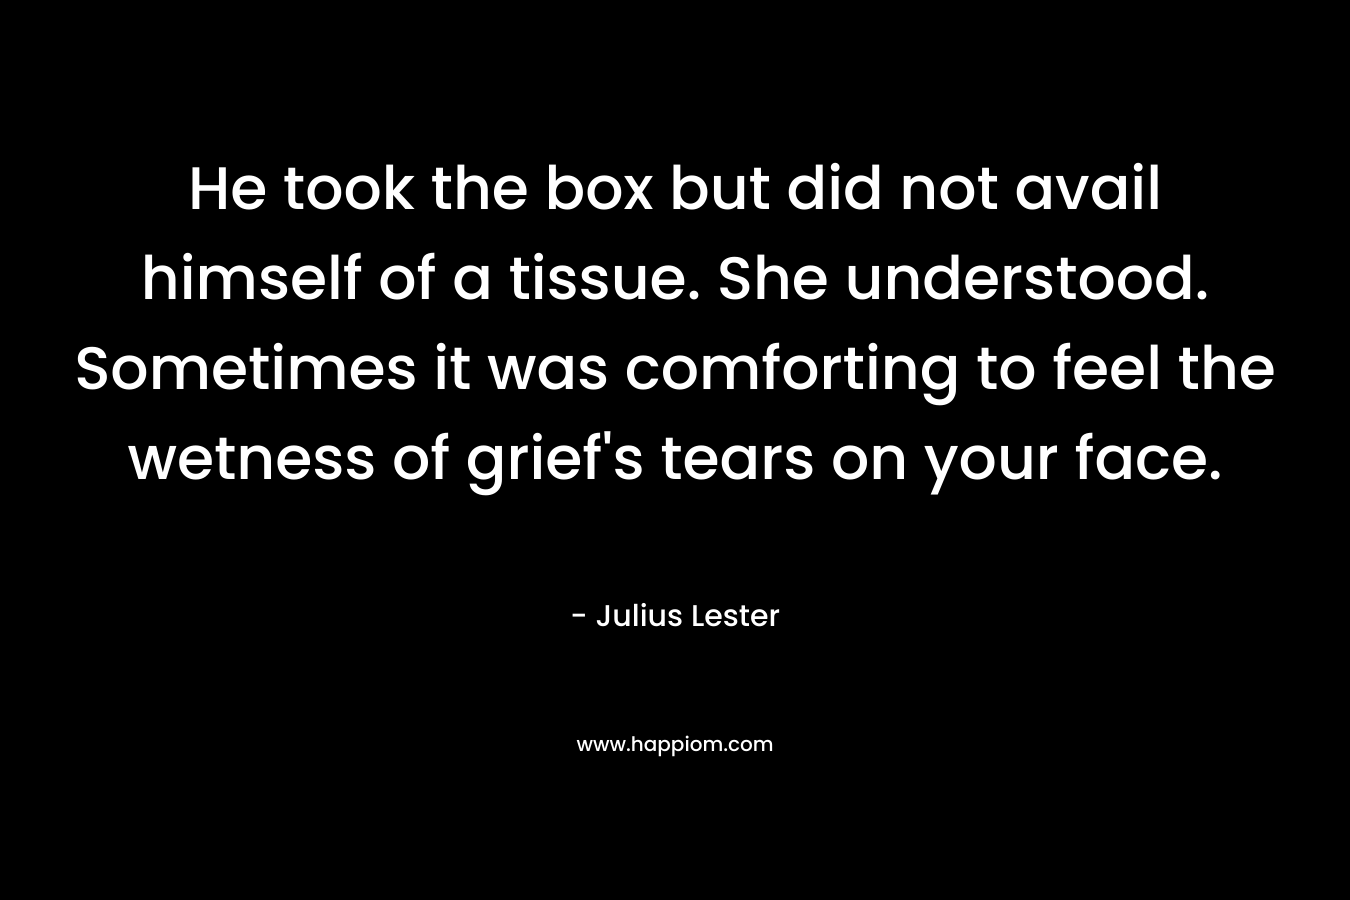 He took the box but did not avail himself of a tissue. She understood. Sometimes it was comforting to feel the wetness of grief’s tears on your face. – Julius Lester